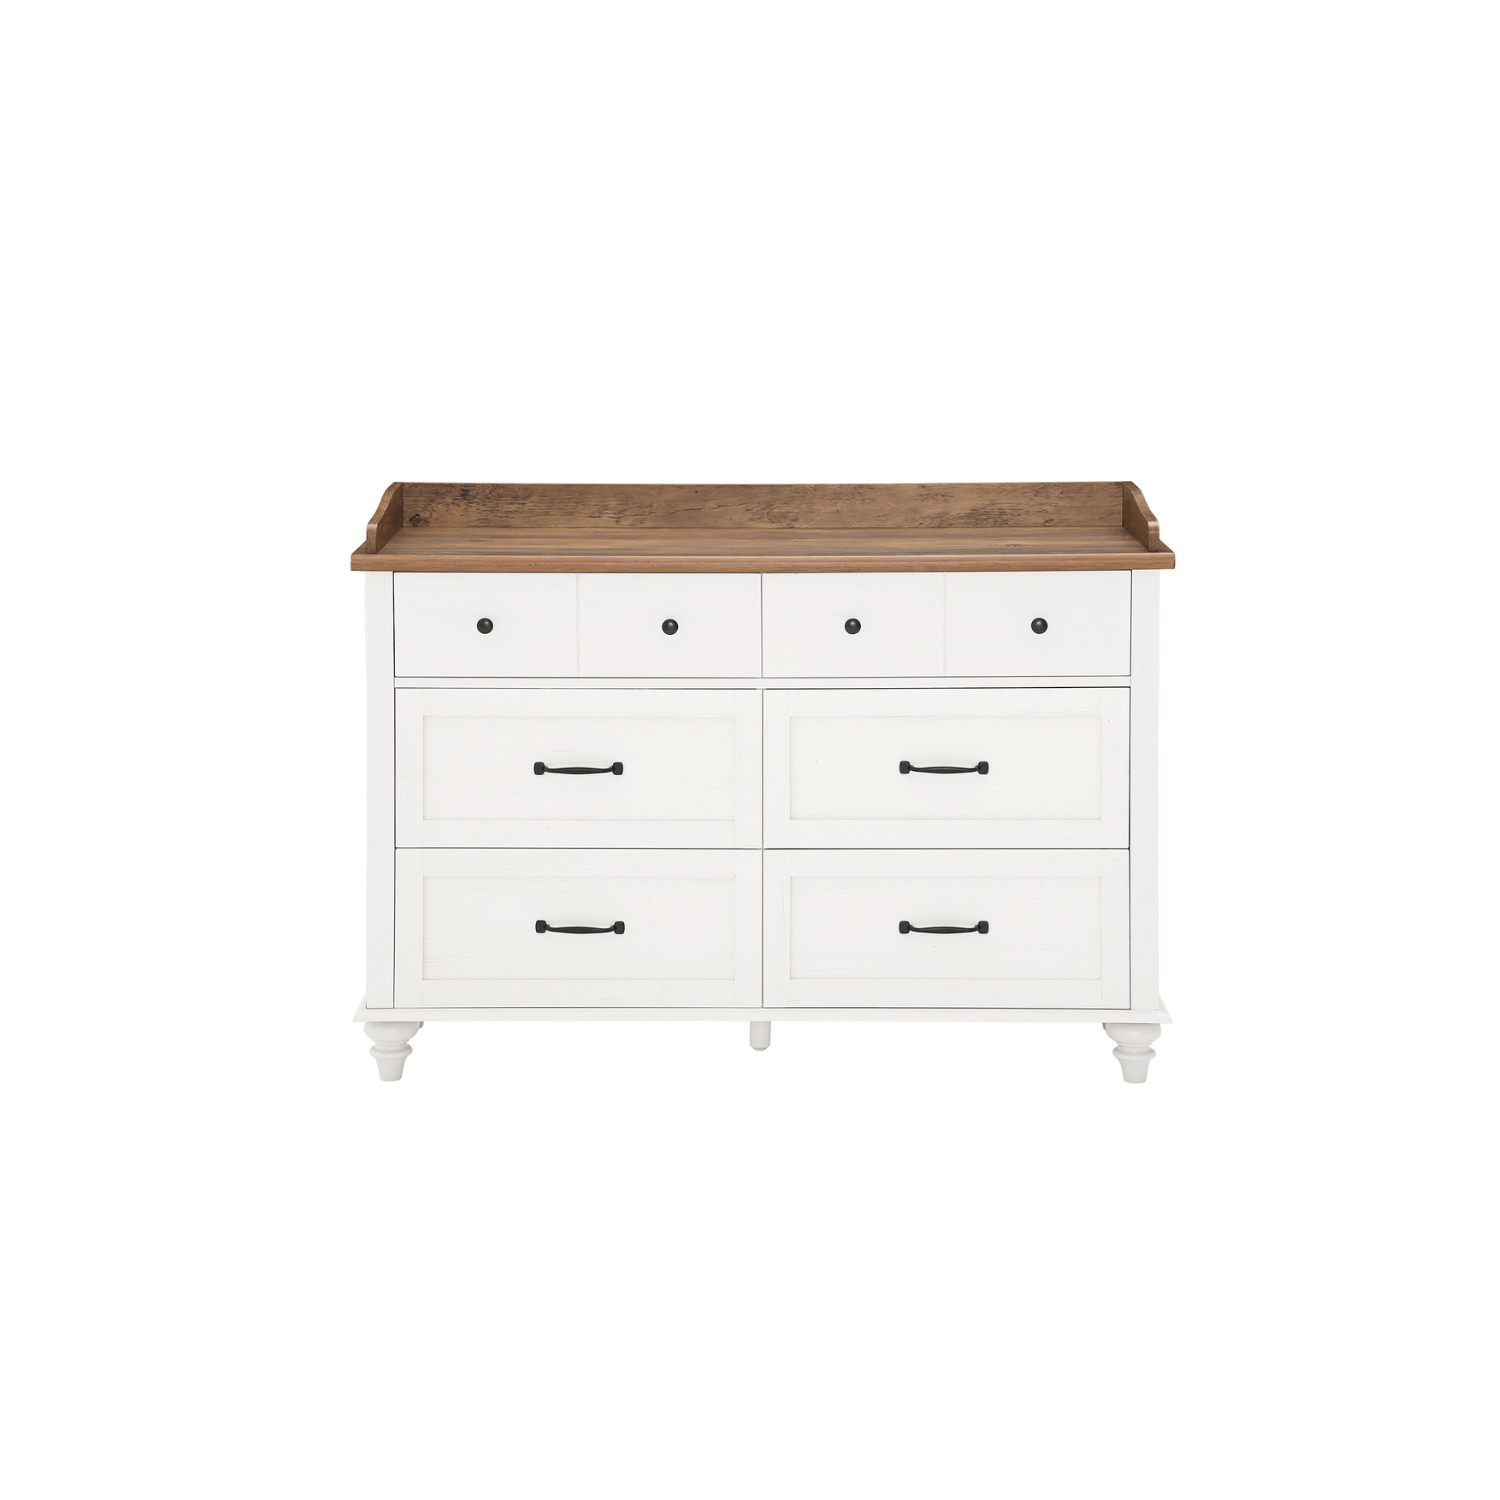 WAMPAT 47" Baby Dresser Changing Table for Nursery, White